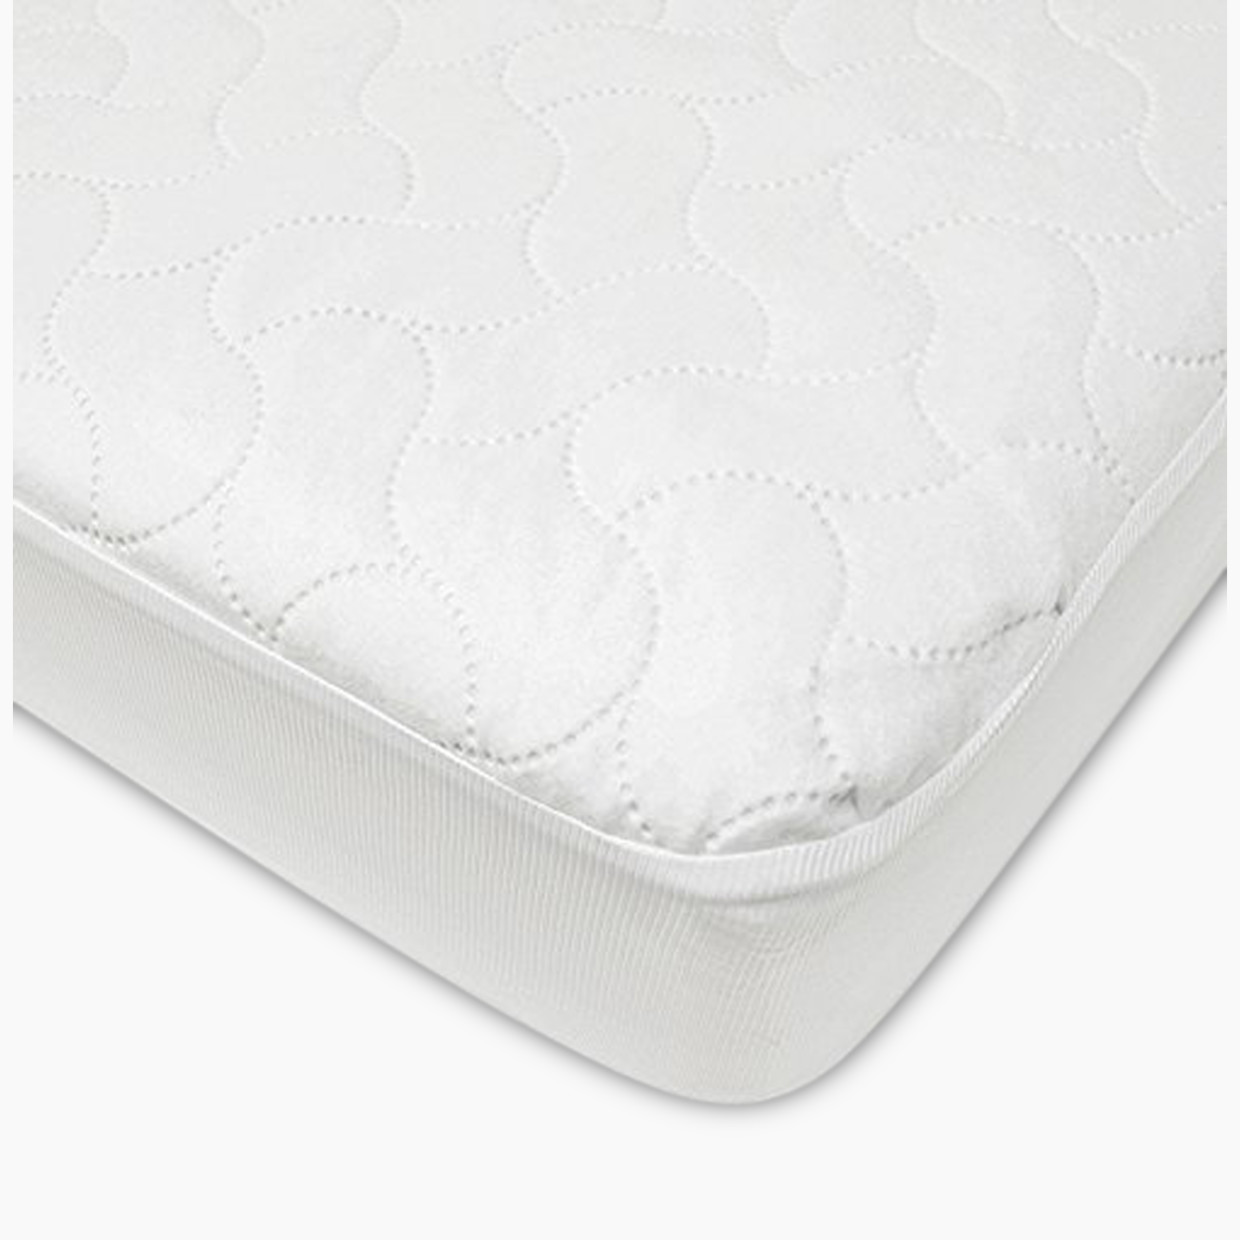  GATHINESS 1pc Toddler Pad Cover Diaper Mattress Bed Cover Bed  wetters Mattress Cover Crib Liner Crib Mattress Protector Urine Proof  Mattress Crib pad Bed pad Quilting White Toddler mat : Home